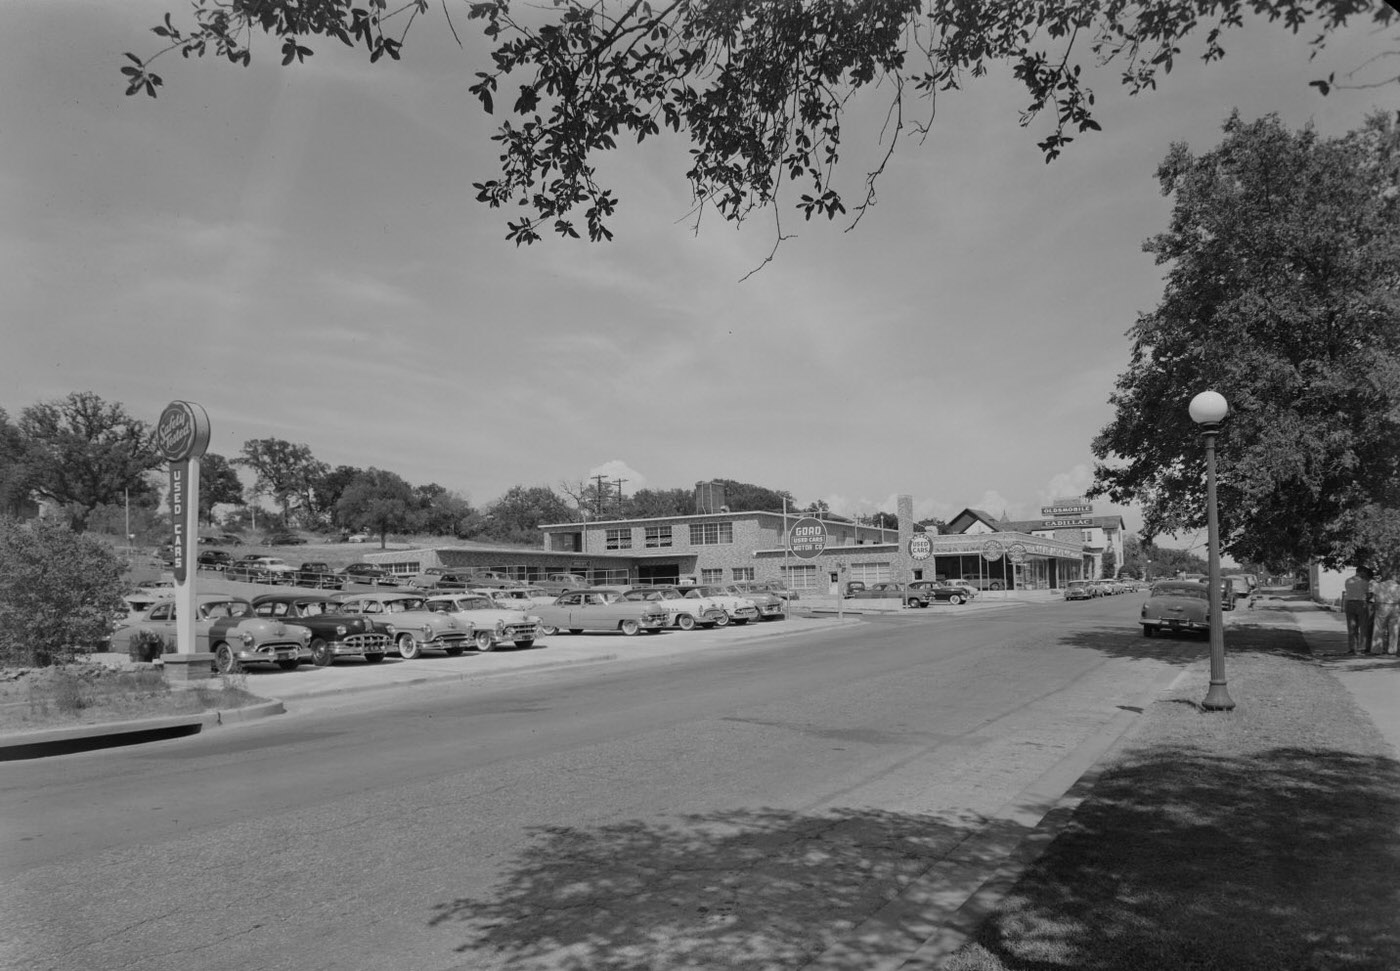 Goad Motor Company Parking Lot Filled with Cars, 1954.